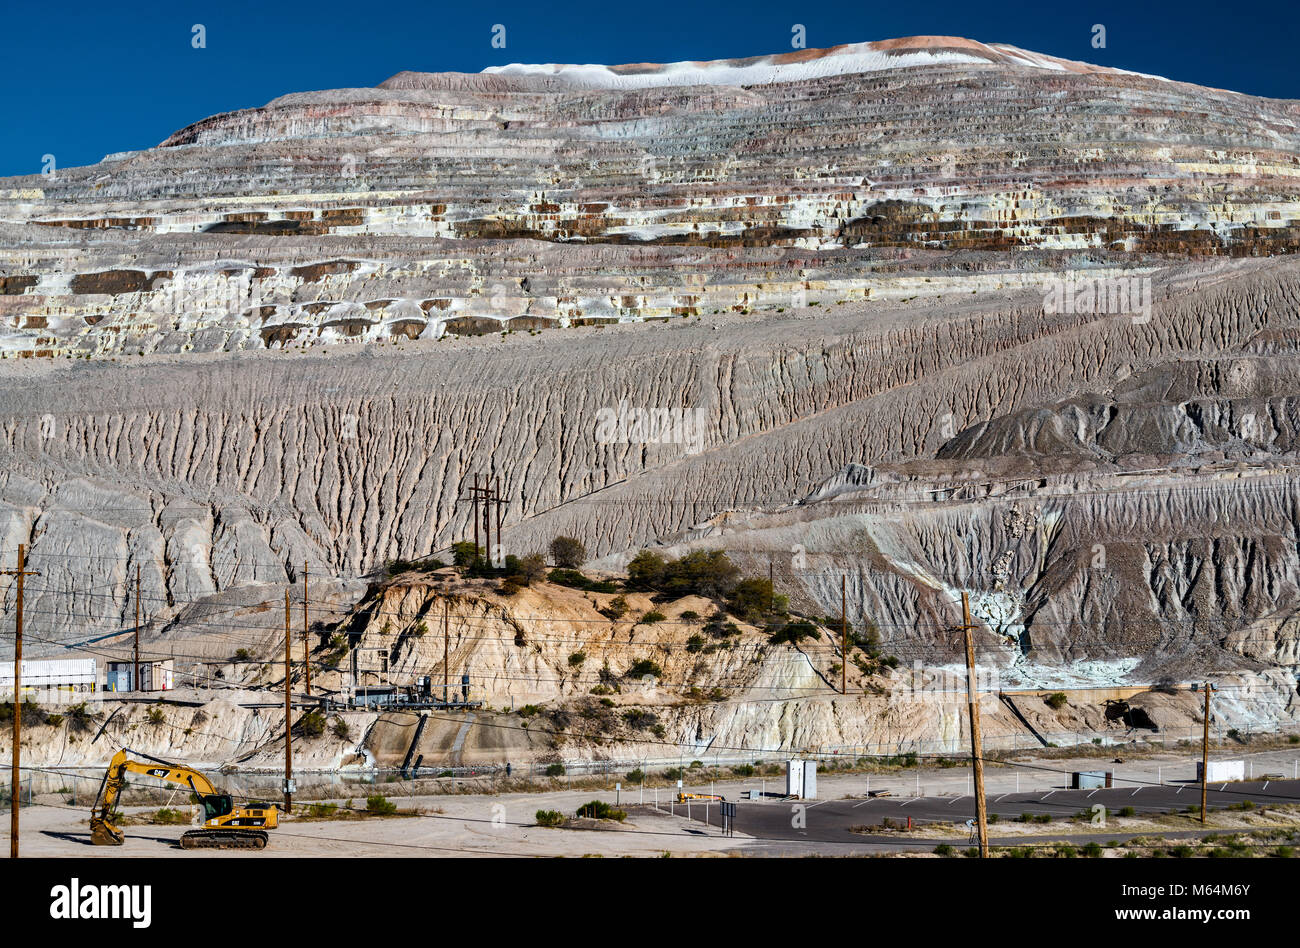 Tailings at Bluebird Copper Mine, open-pit mine operated by Freeport-McMoRan Copper & Gold, seen from Gila Pinal Scenic Road, near Miami, Arizona, USA Stock Photo